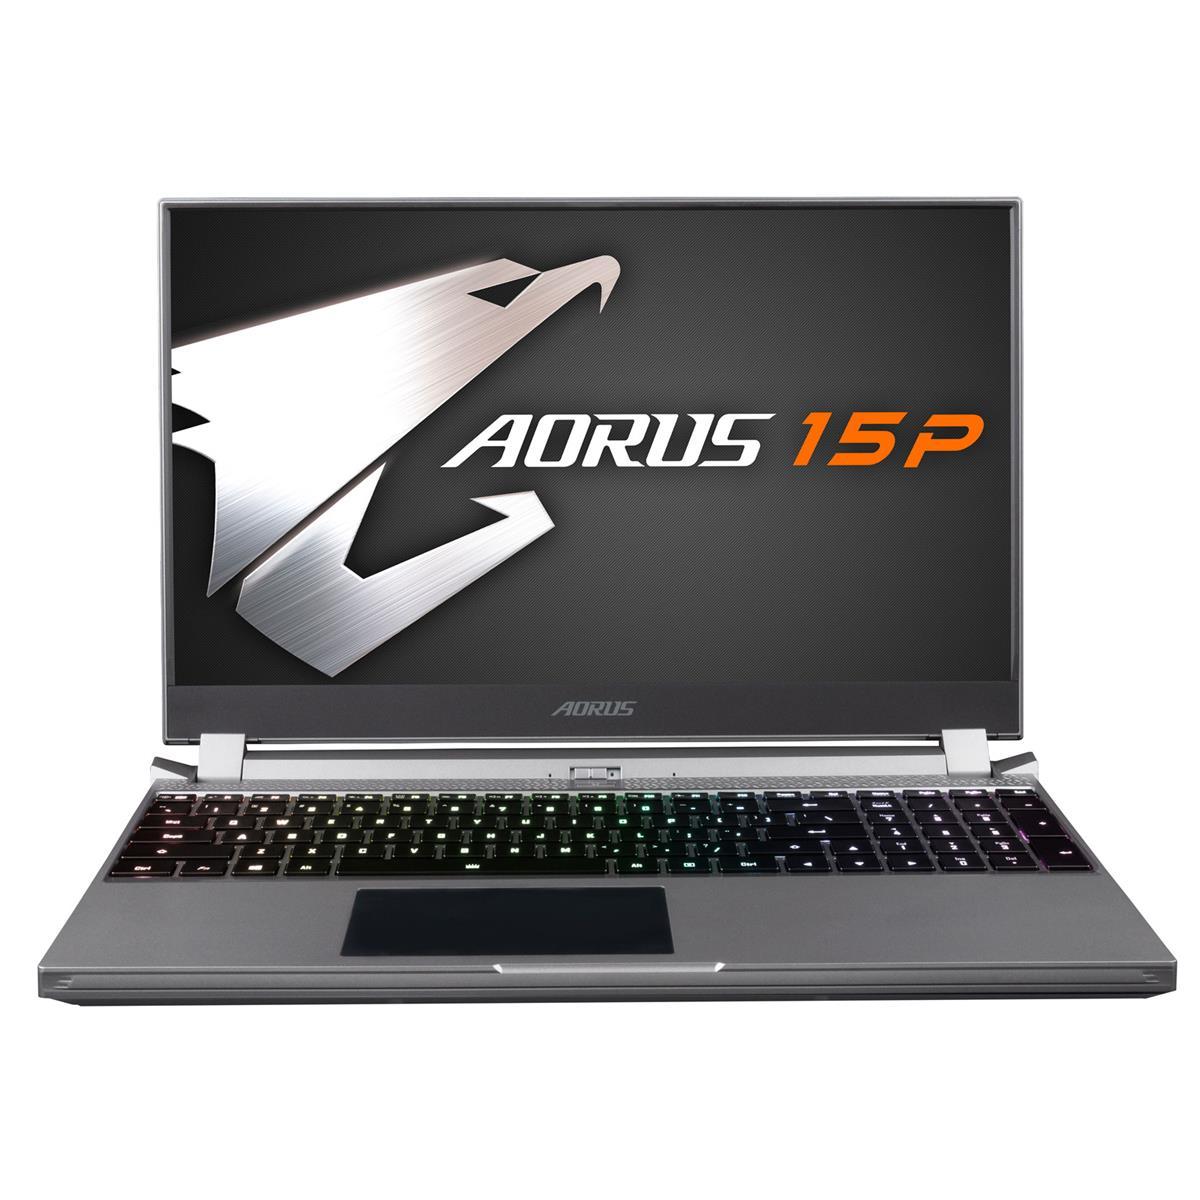 Gigabyte Aorus 15P i7 16GB 512GB Notebook Laptop for $1149.99 Shipped